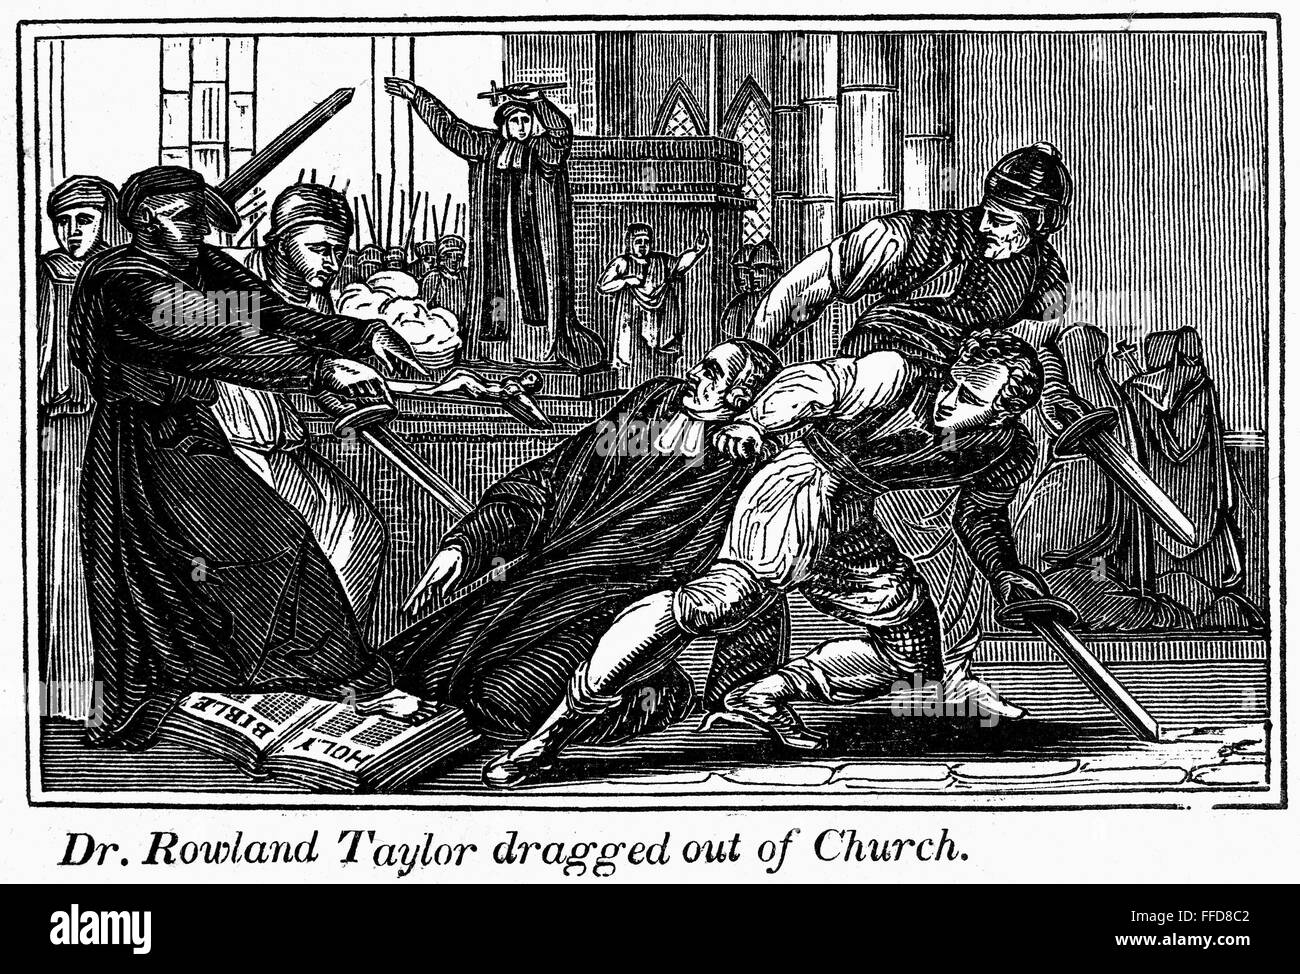 FOXE: BOOK OF MARTYRS./nAnglican rector Rowland Taylor dragged out of church during the Marian Persecutions in England, 1555. Line engraving, 19th century. Stock Photo